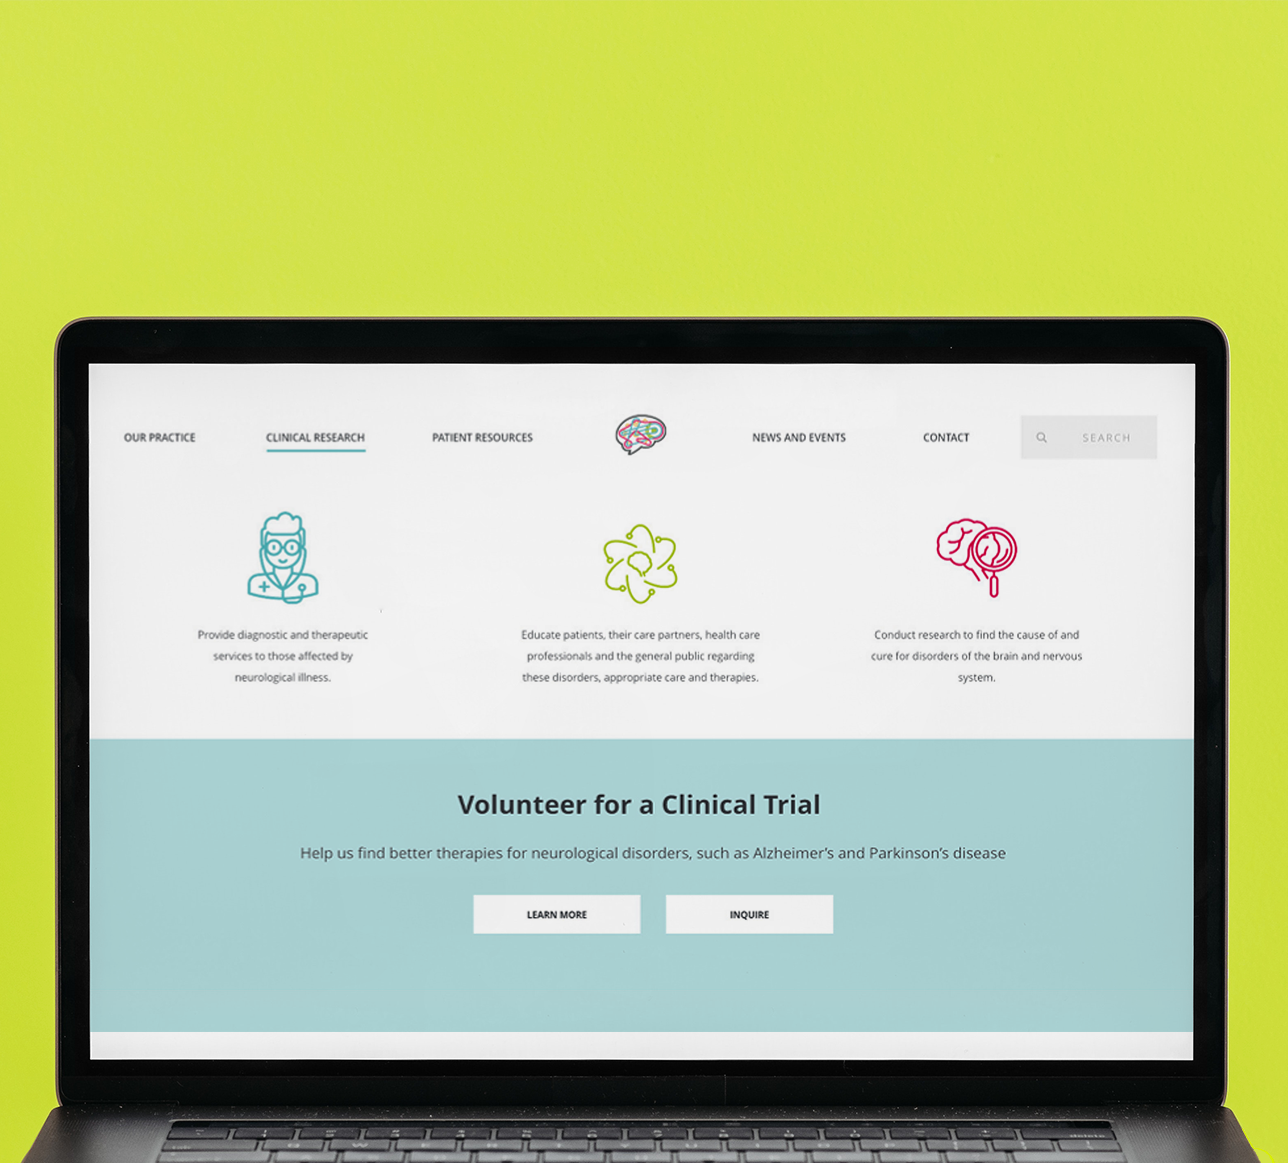 A laptop screen showcasing the UX homepage design for a neurology brand.